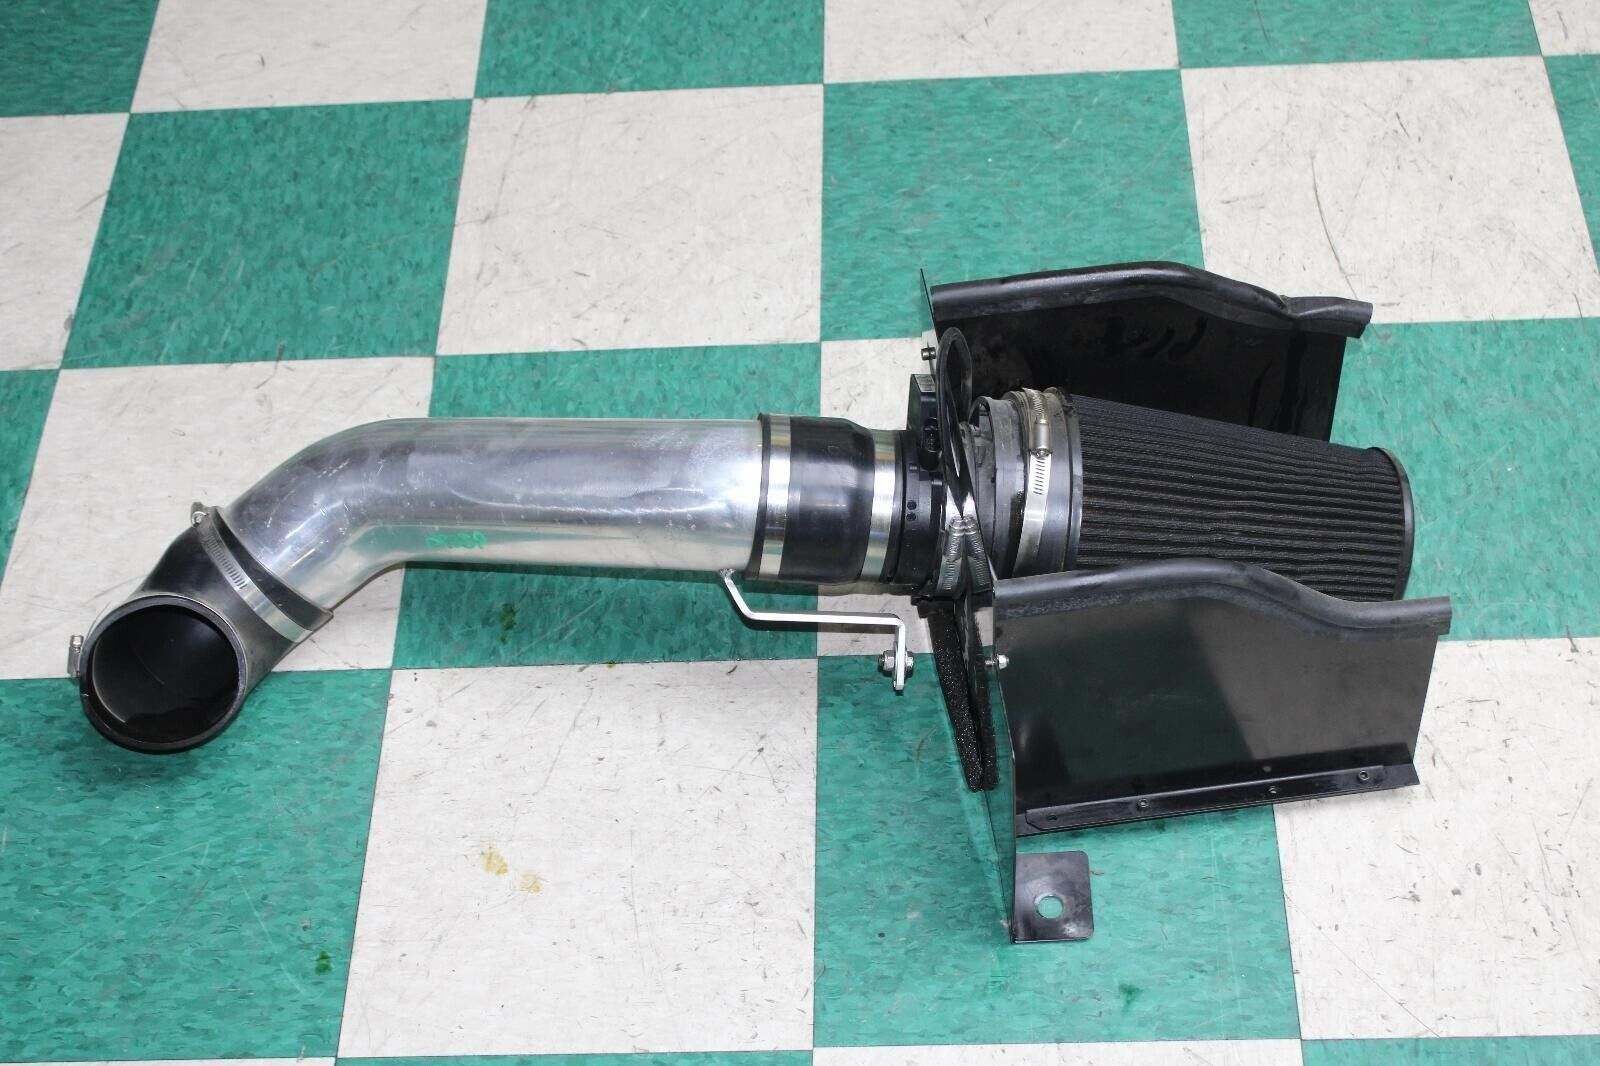 03-09 Hummer H2 6.0L Motor Engine Aftermarket Cold Air Intake Air Cleaner Box